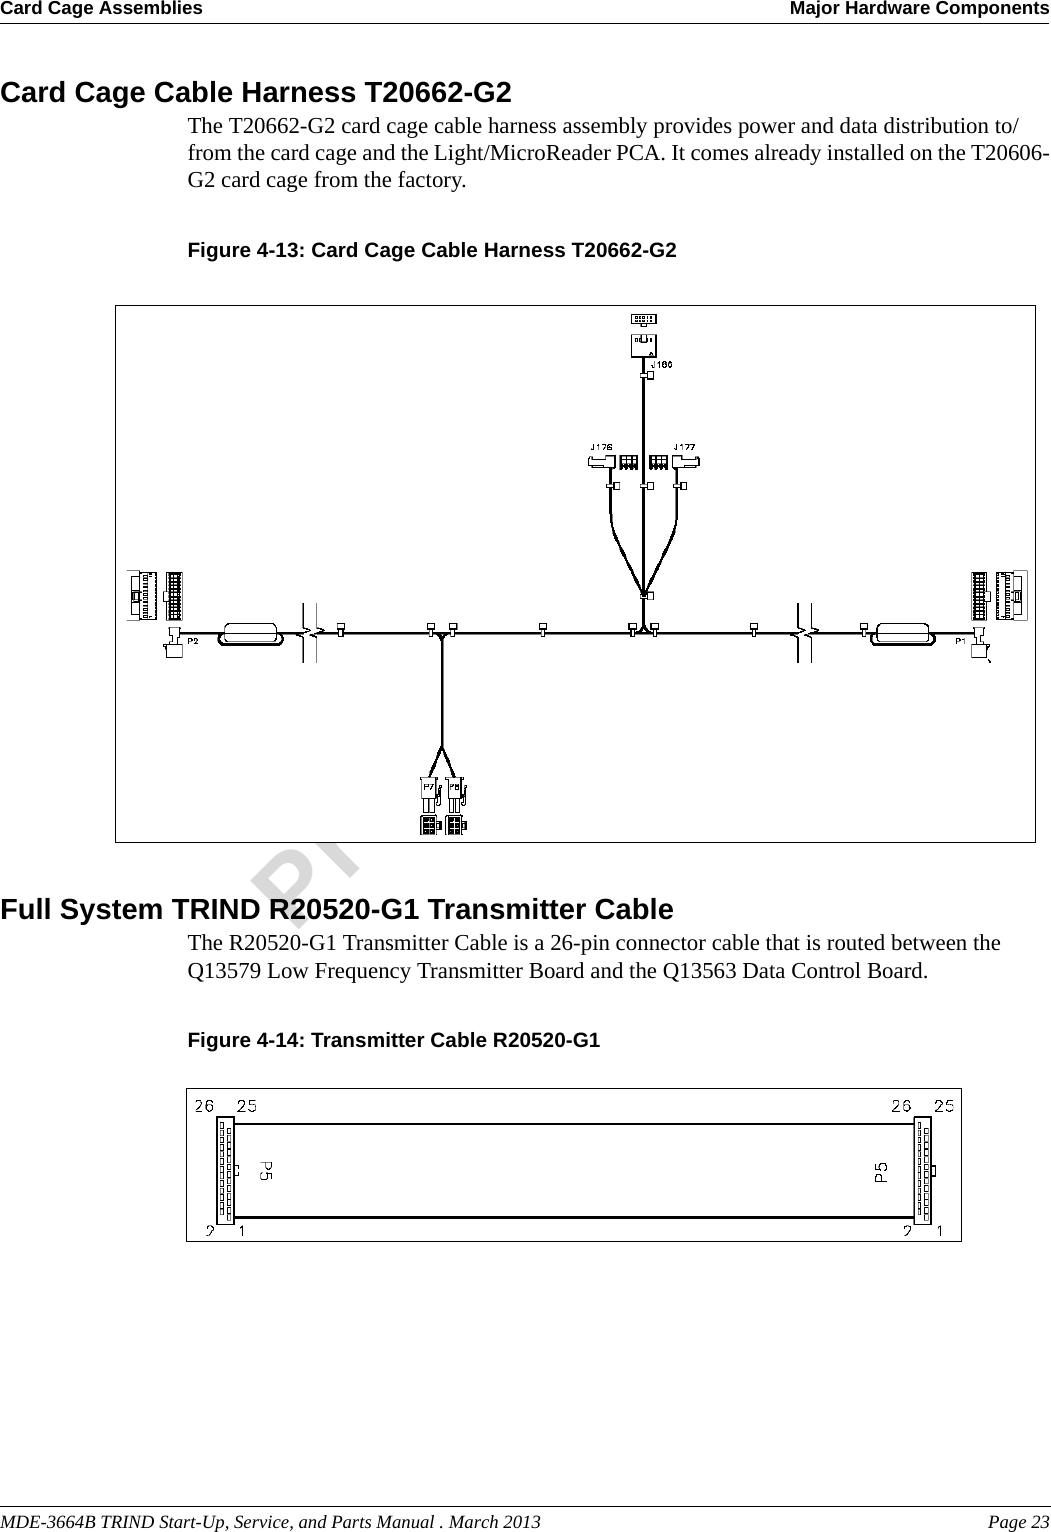 MDE-3664B TRIND Start-Up, Service, and Parts Manual . March 2013 Page 23Card Cage Assemblies Major Hardware ComponentsPreliminaryCard Cage Cable Harness T20662-G2The T20662-G2 card cage cable harness assembly provides power and data distribution to/from the card cage and the Light/MicroReader PCA. It comes already installed on the T20606-G2 card cage from the factory.Figure 4-13: Card Cage Cable Harness T20662-G2Full System TRIND R20520-G1 Transmitter CableThe R20520-G1 Transmitter Cable is a 26-pin connector cable that is routed between the Q13579 Low Frequency Transmitter Board and the Q13563 Data Control Board.Figure 4-14: Transmitter Cable R20520-G1